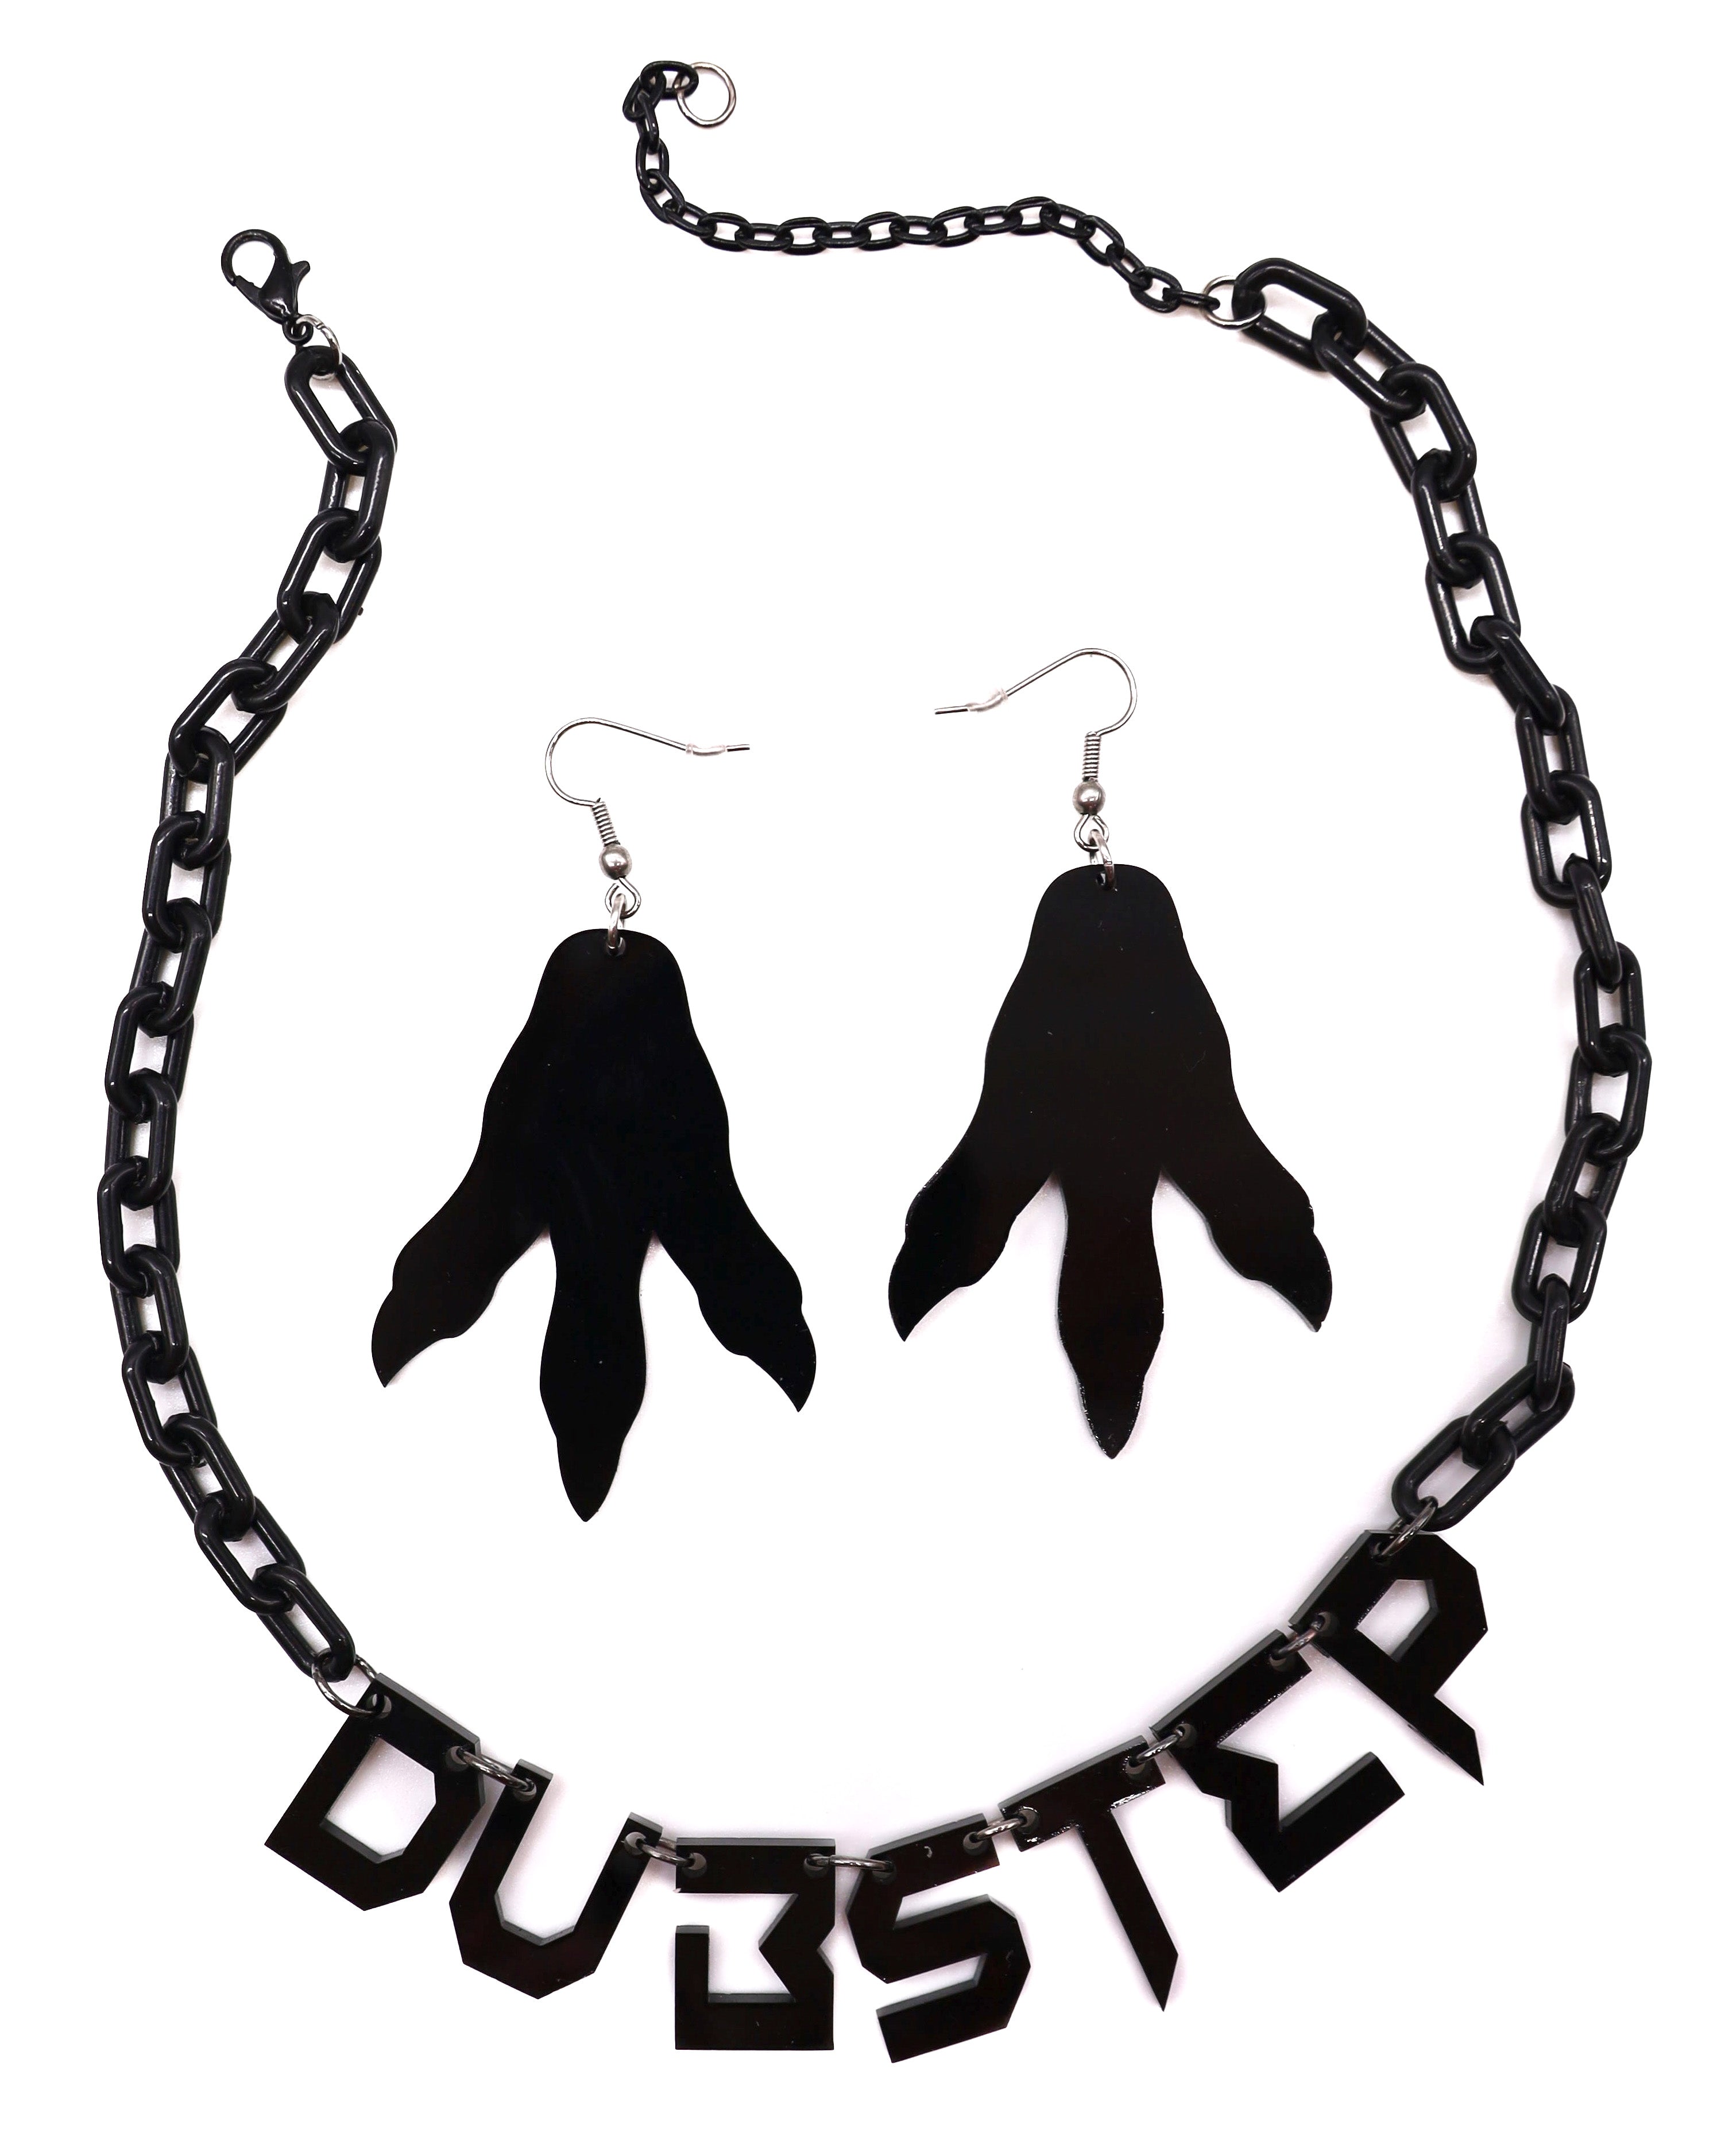 Dino Print Earrings in Black - Perfectly Complemented by the Dubstep Choker Necklace